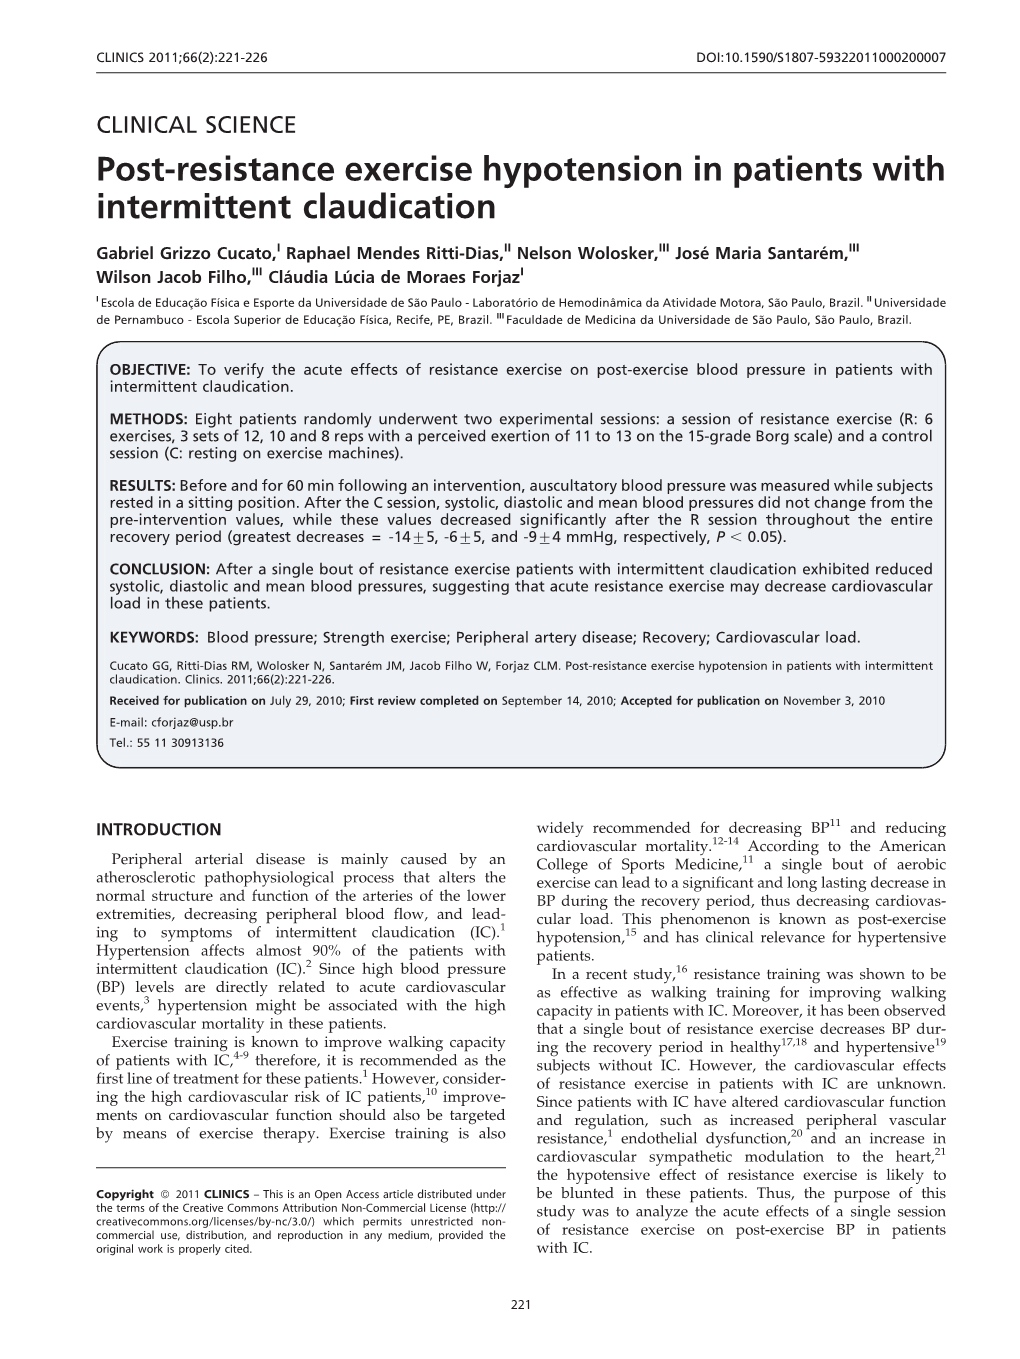 Post-Resistance Exercise Hypotension in Patients with Intermittent Claudication